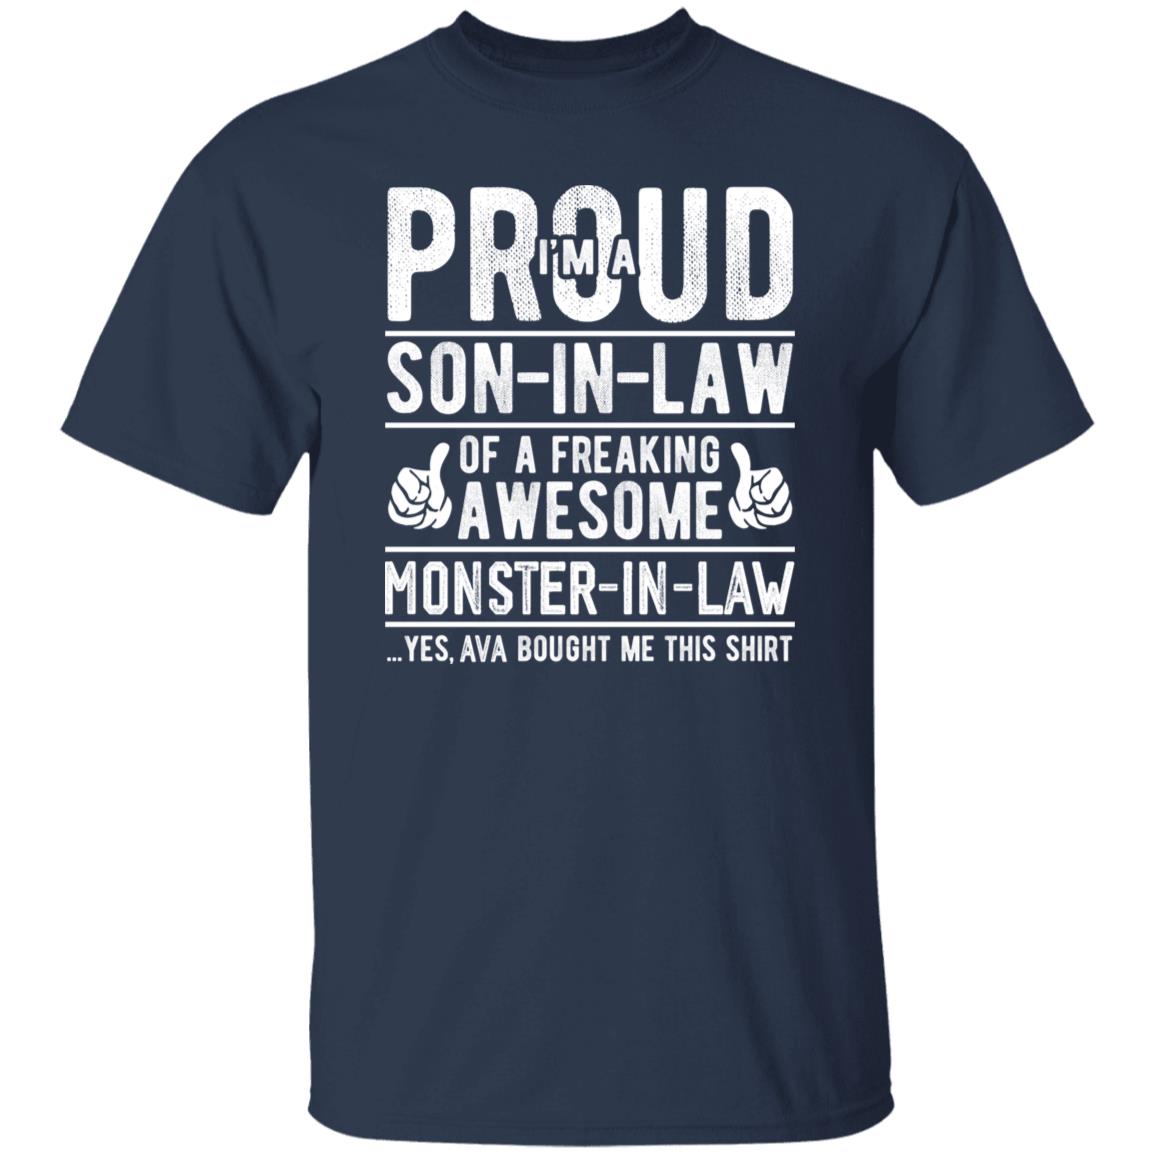 I'm a Proud Son-in-law Funny Customized Tee Shirt From Monster in law